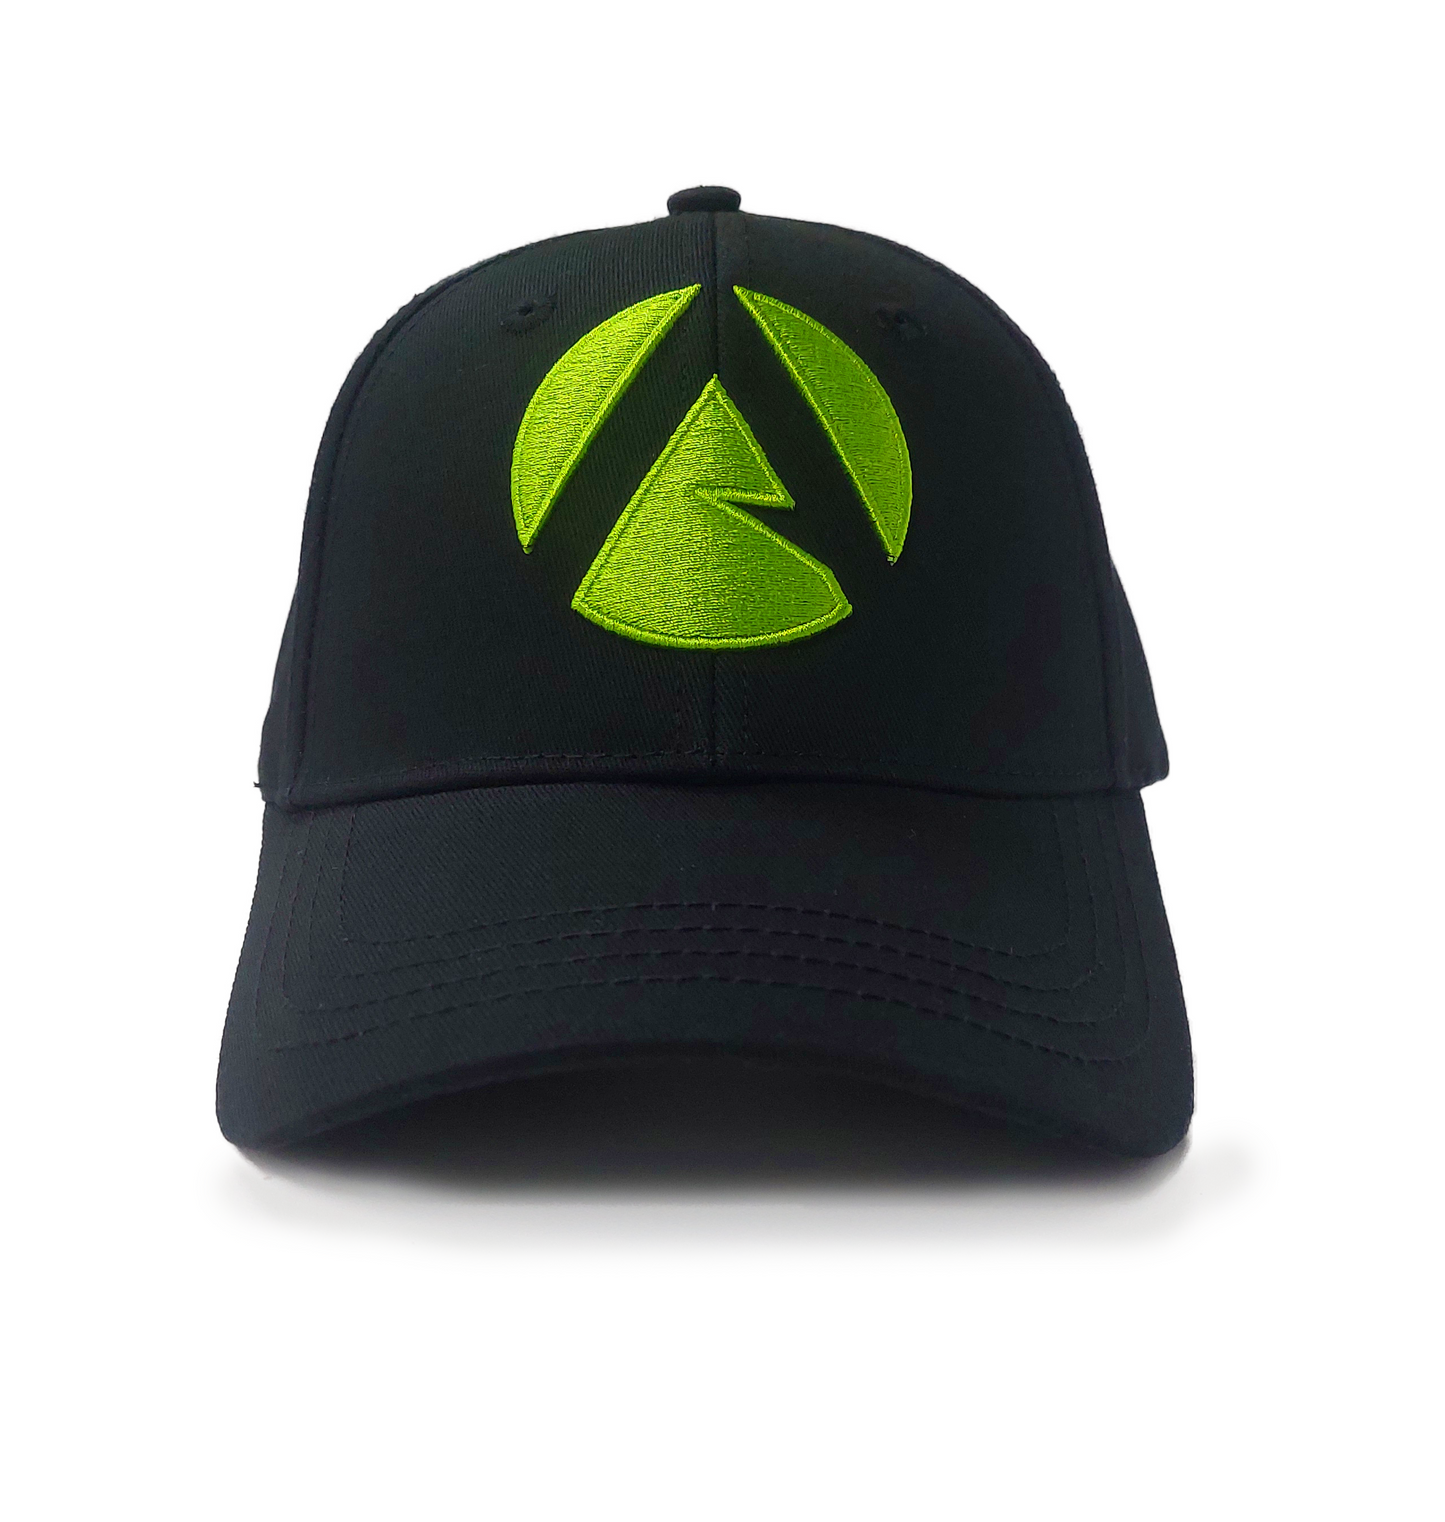 AT052 - Baseball Cap Curved Peak Front Icon - Black/Lime